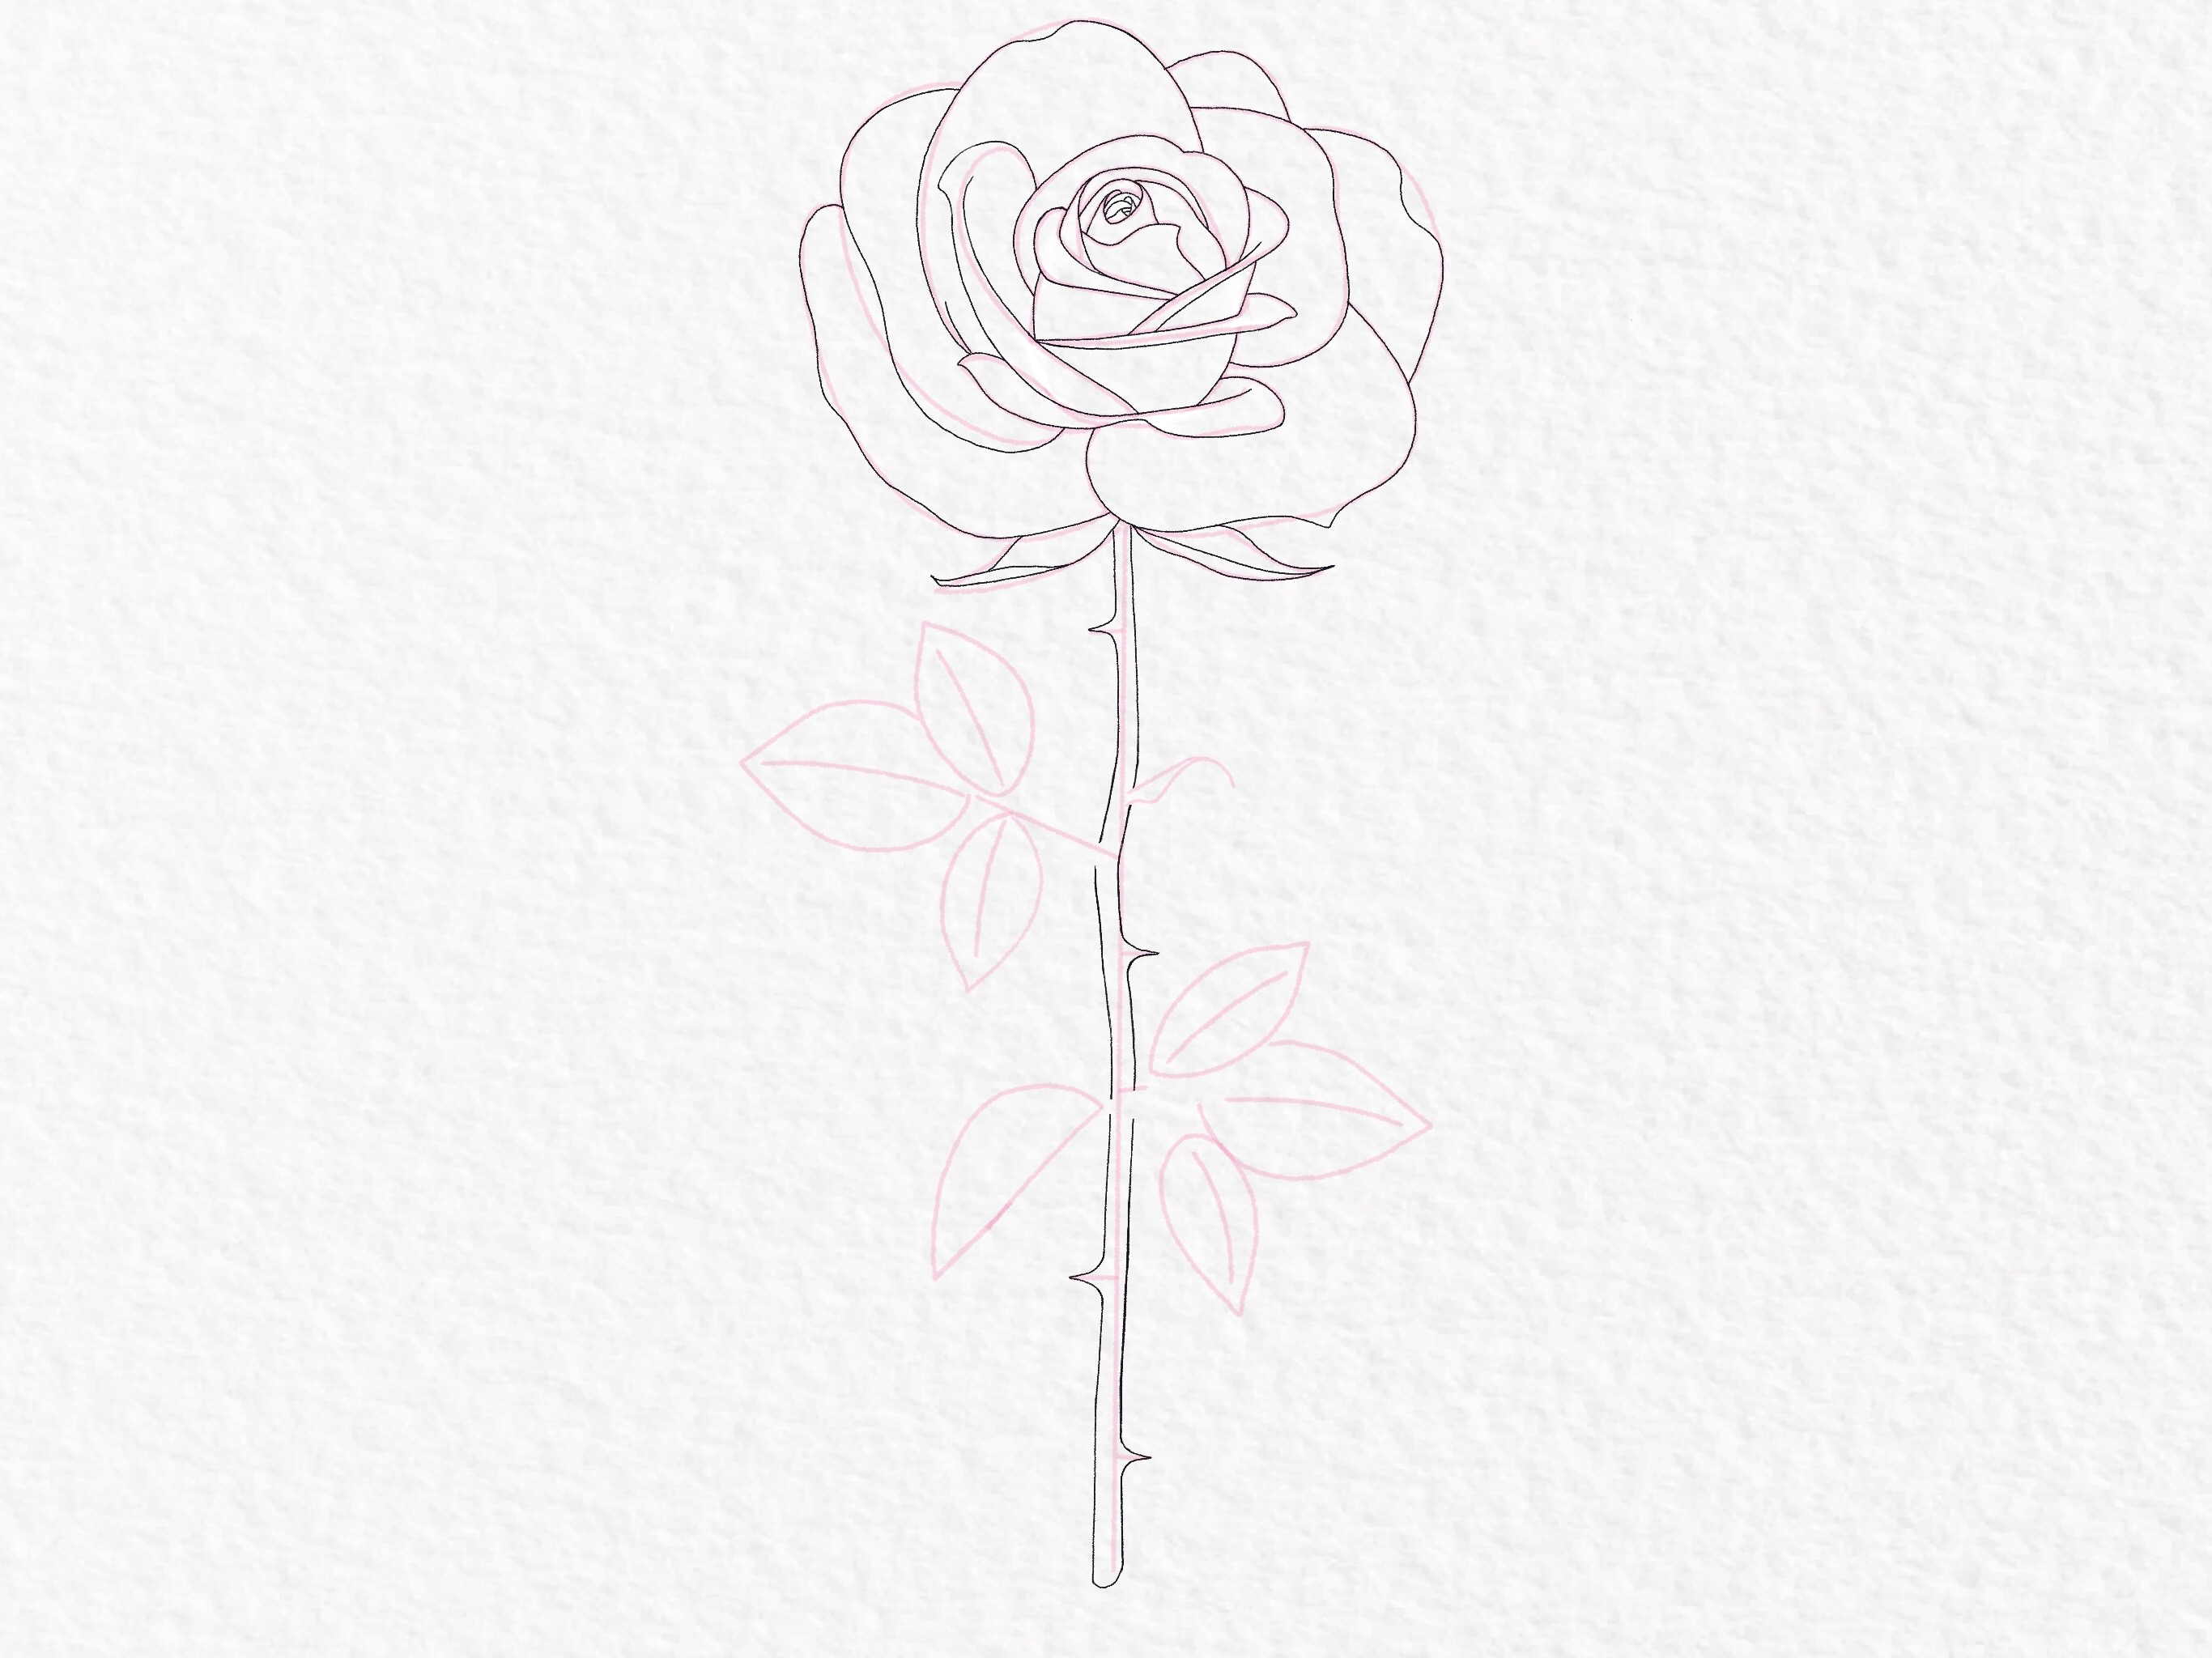 How to draw a rose, step by step drawing tutorial - step 34